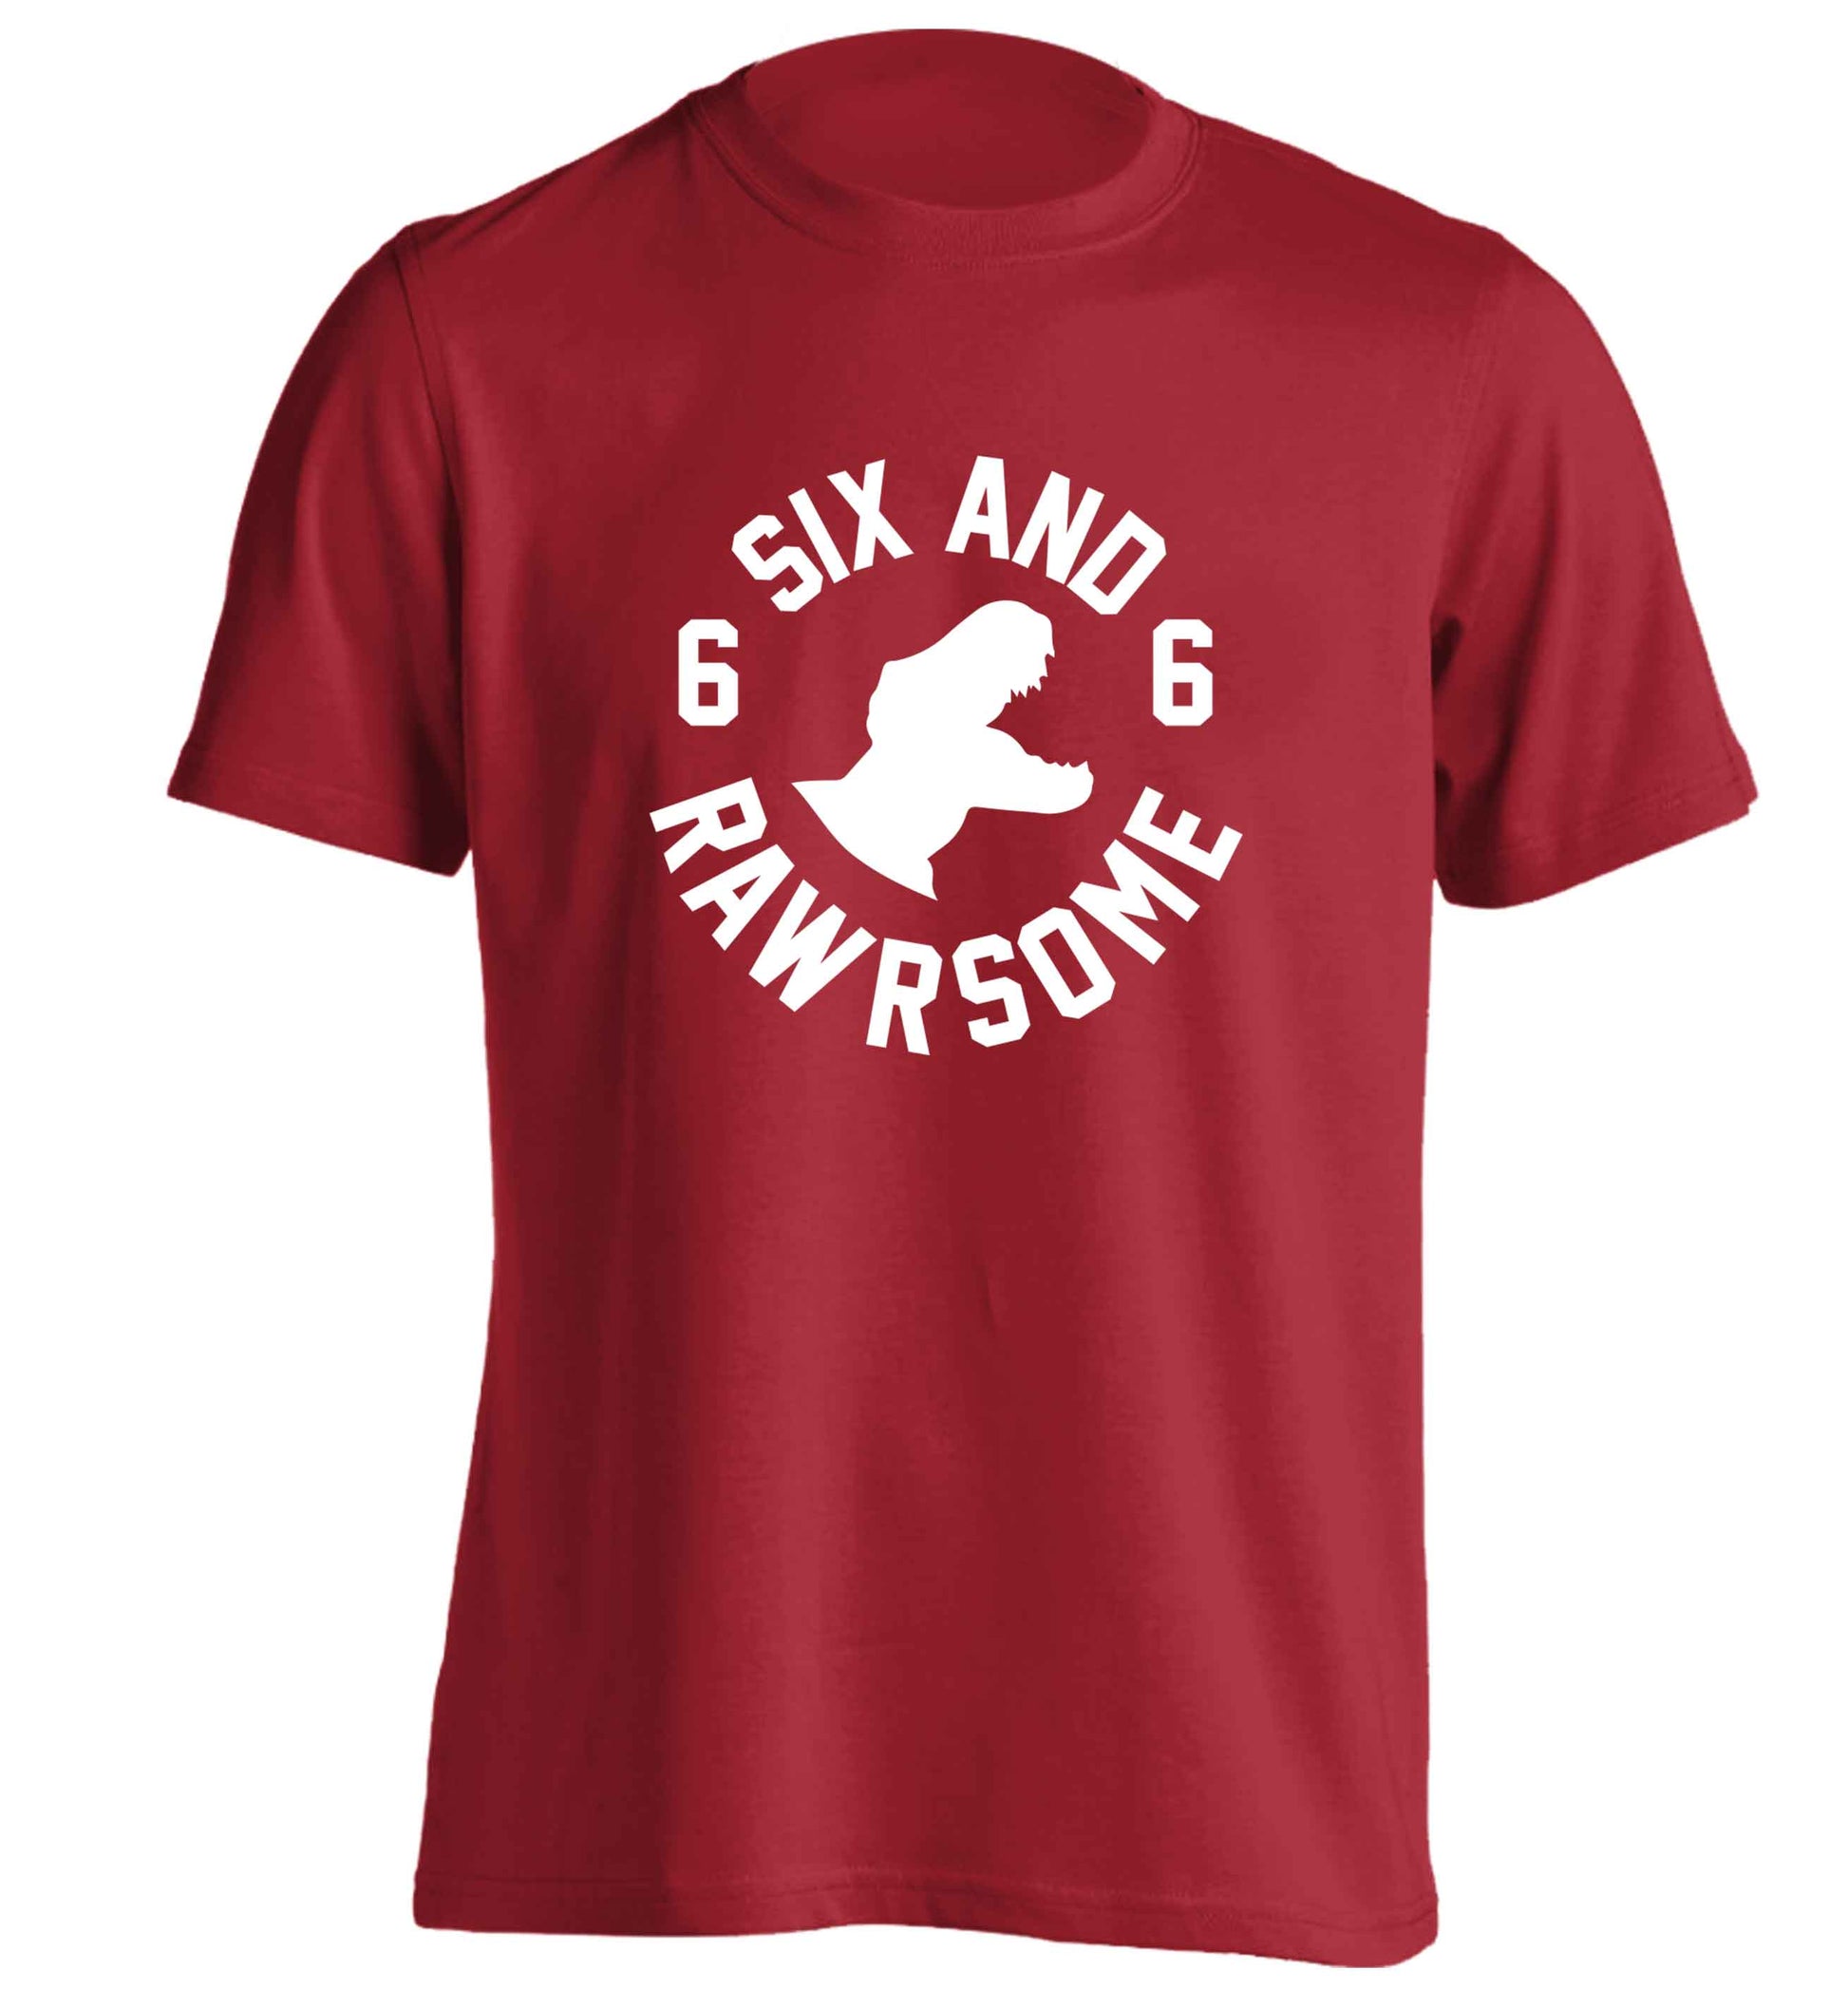 Six and rawrsome adults unisex red Tshirt 2XL